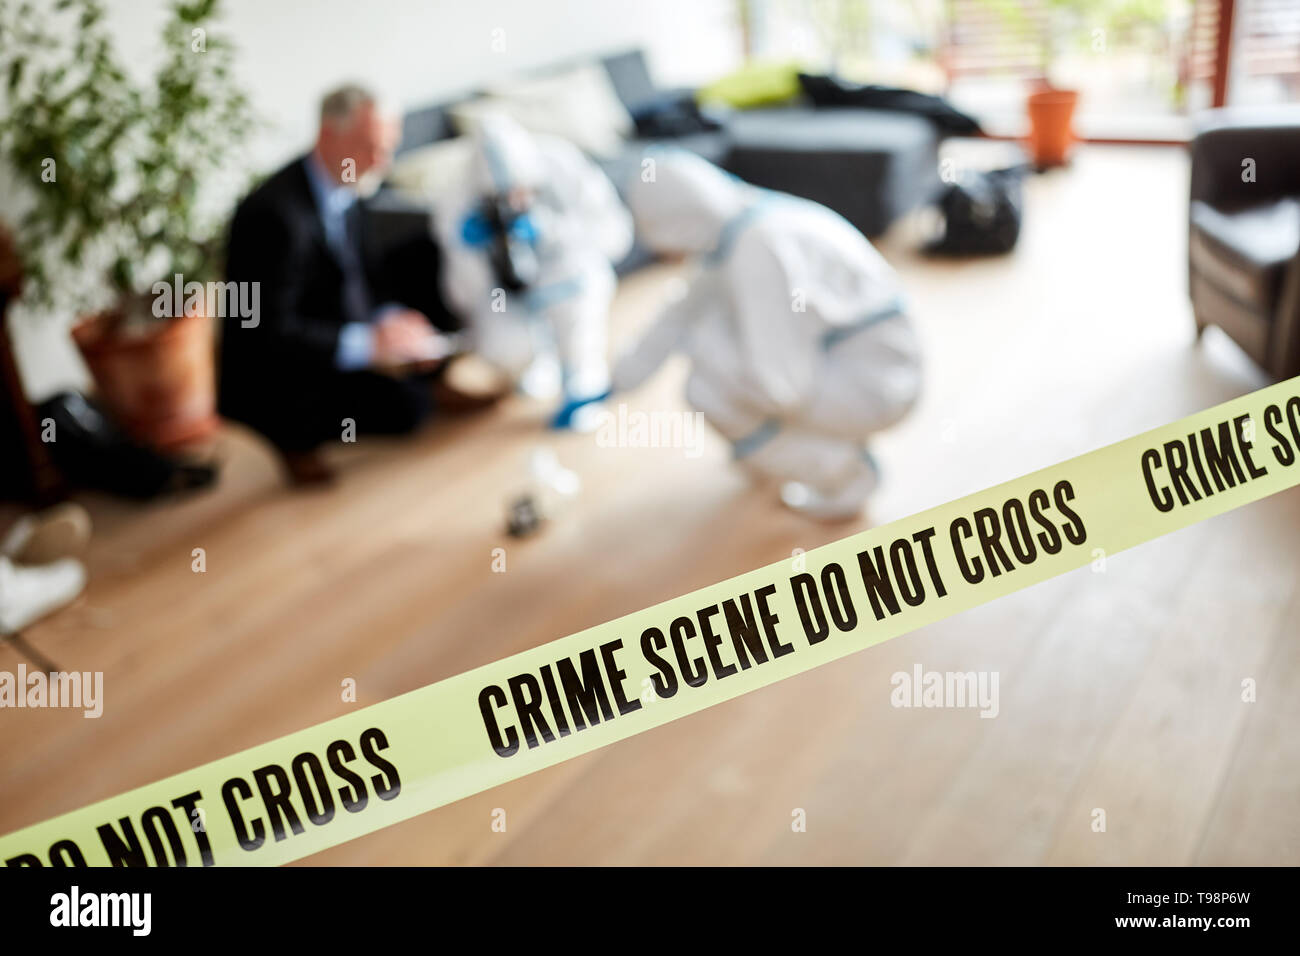 Locking the police at the scene after burglary or robbery Stock Photo